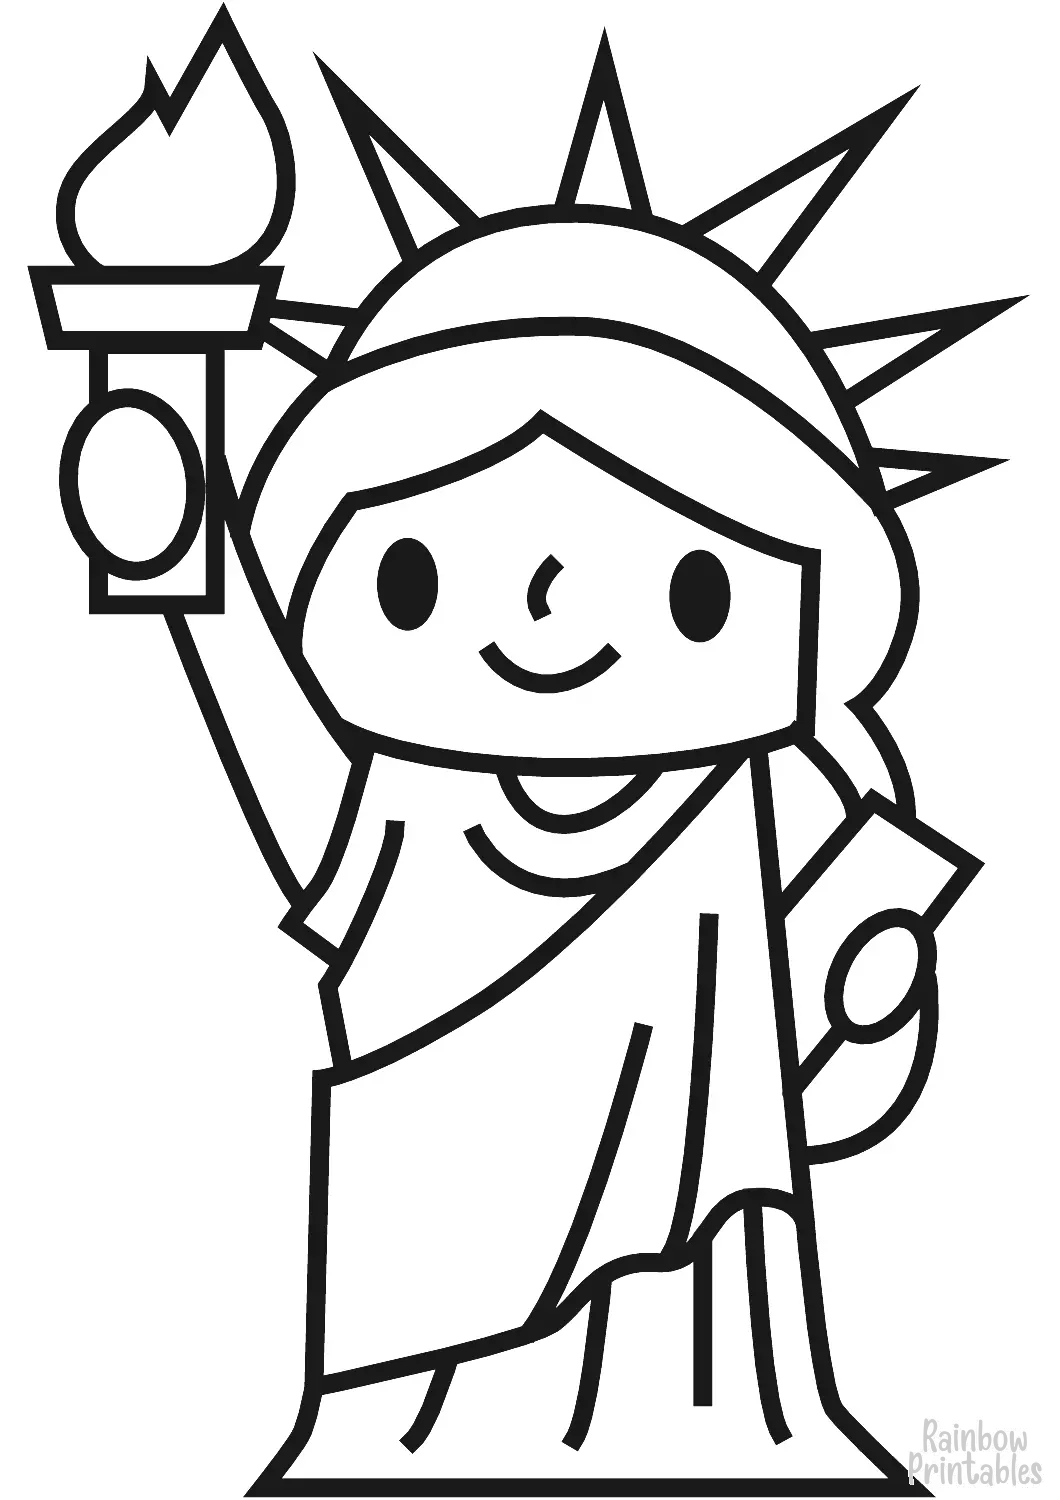 CUTE CHIBI USA AMERICAN STATUE OF LIBERTY INDEPENDENCE LABOR DAY Clipart Coloring Pages Line Art Drawings for Kids-